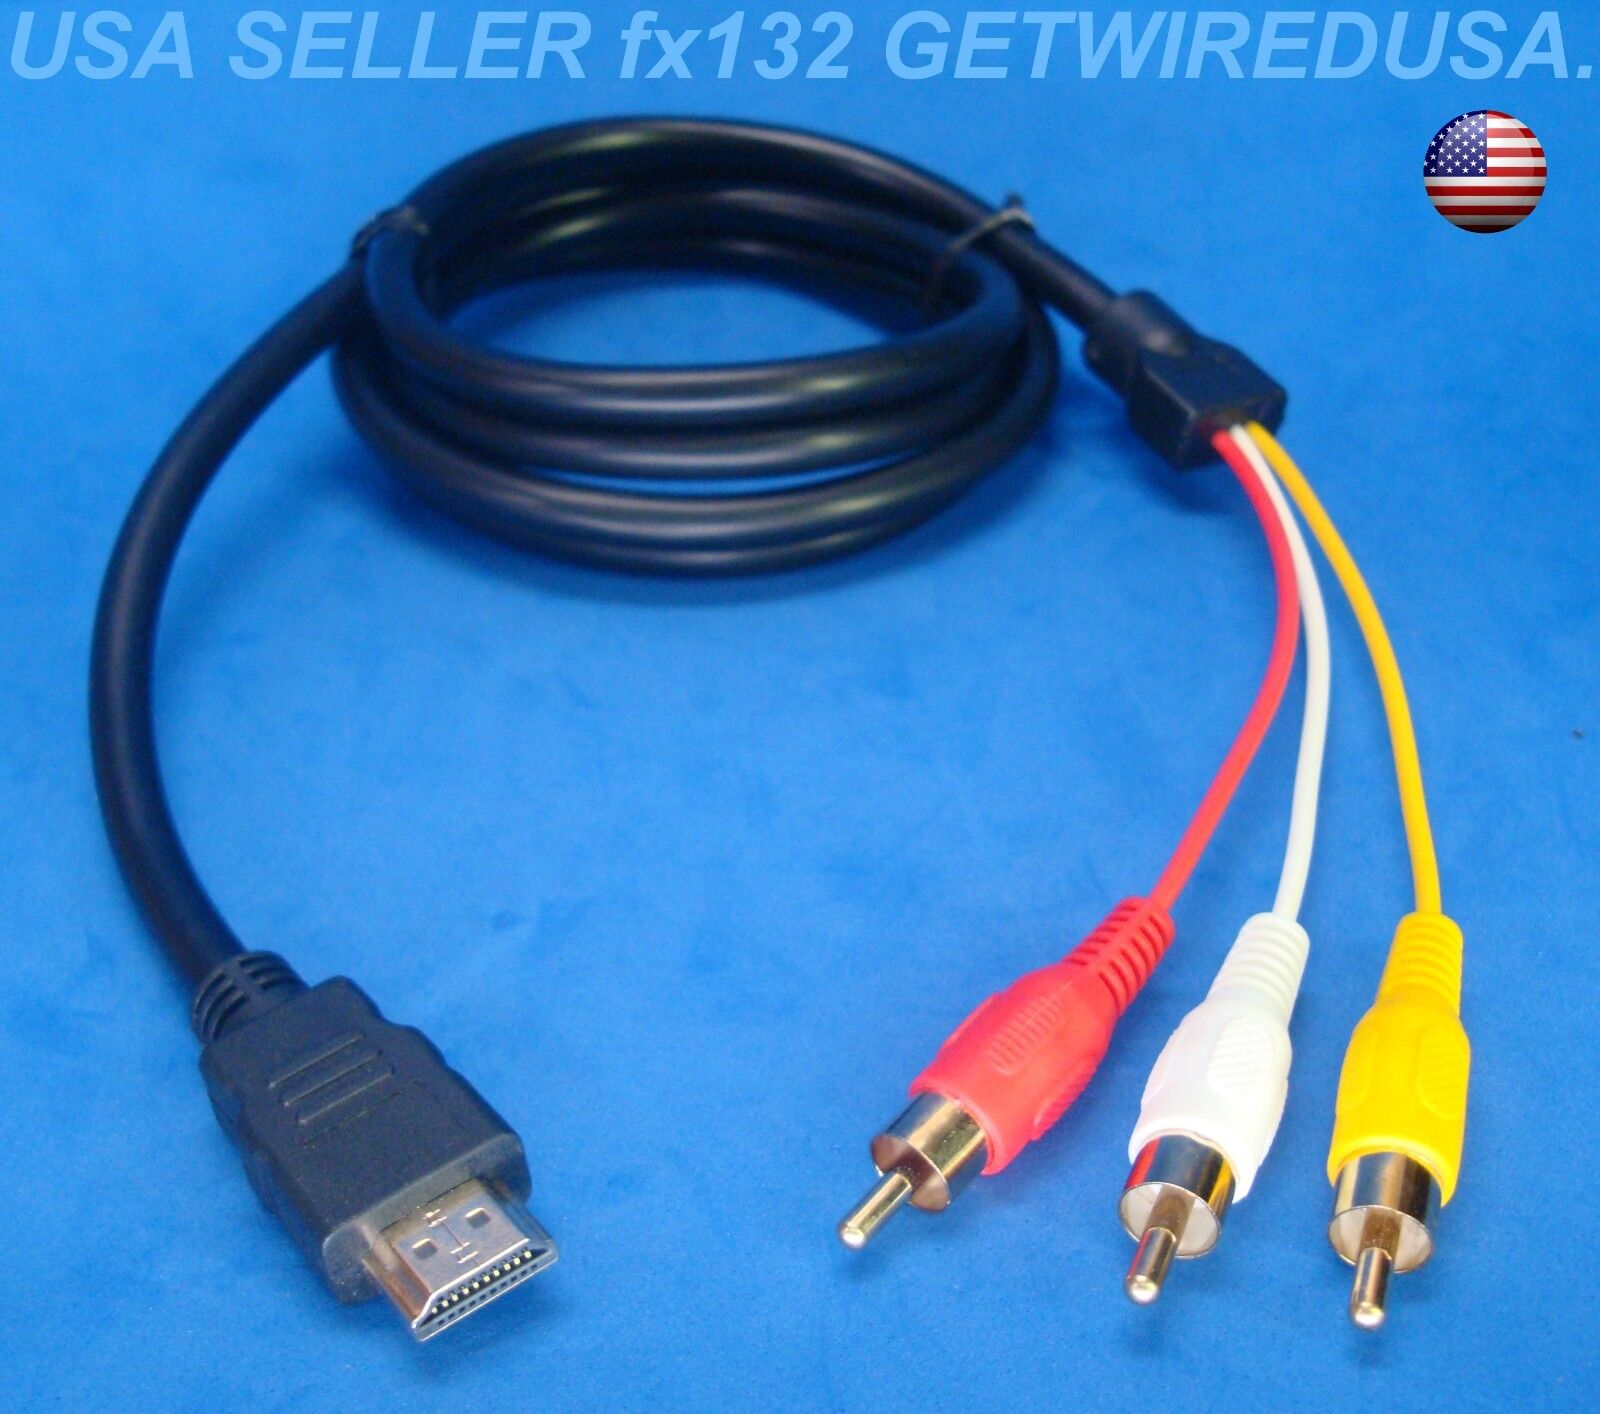 usa seller 3-RCA JACKS RED YELLOW WHITE to HDMI AUDIO VIDEO ADAPTOR 5FT AUX CORD